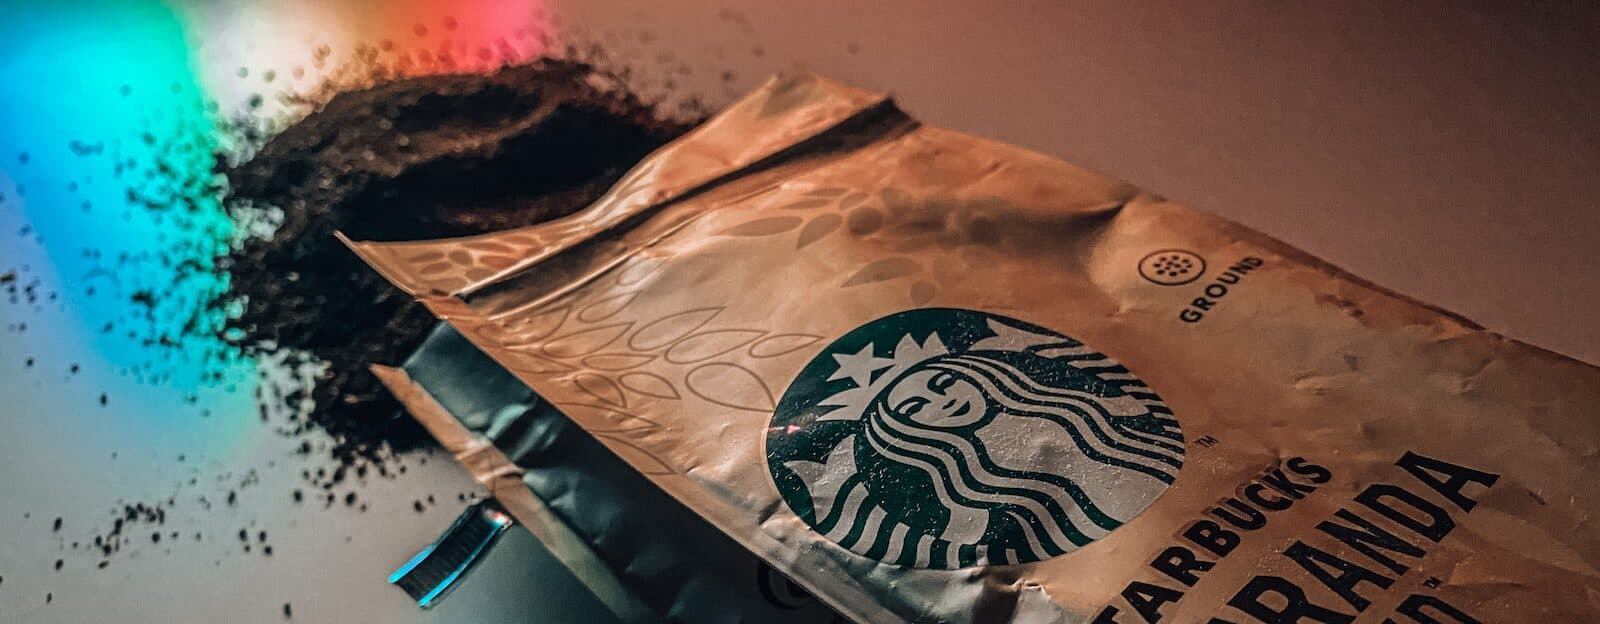 coffee grounds spilling out of brown starbucks coffee bean paper bag